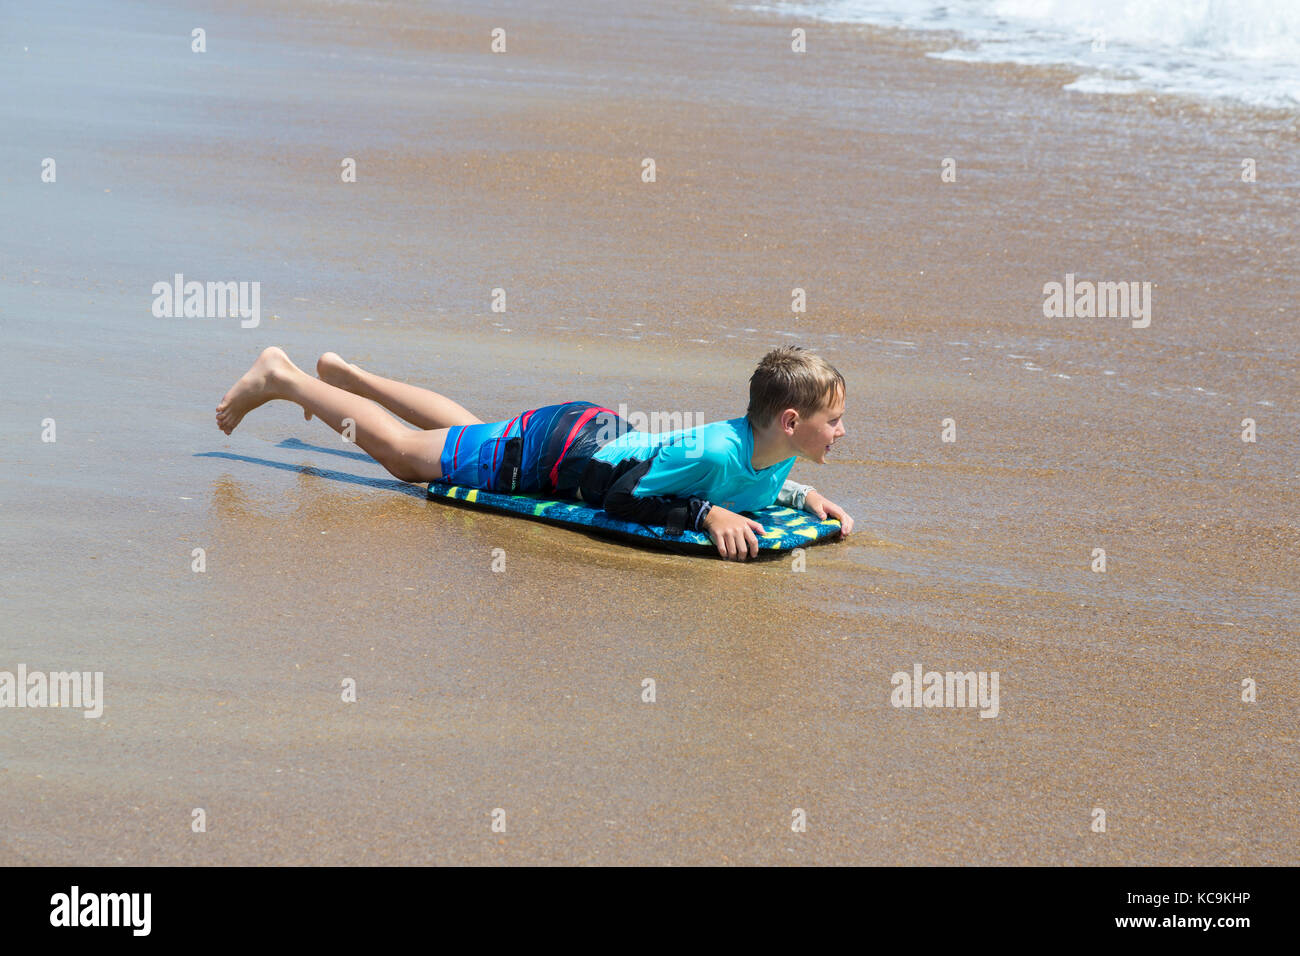 Avon, Outer Banks, North Carolina, USA.  Young Boy Grounded on the Beach with his Boogie Board. Stock Photo